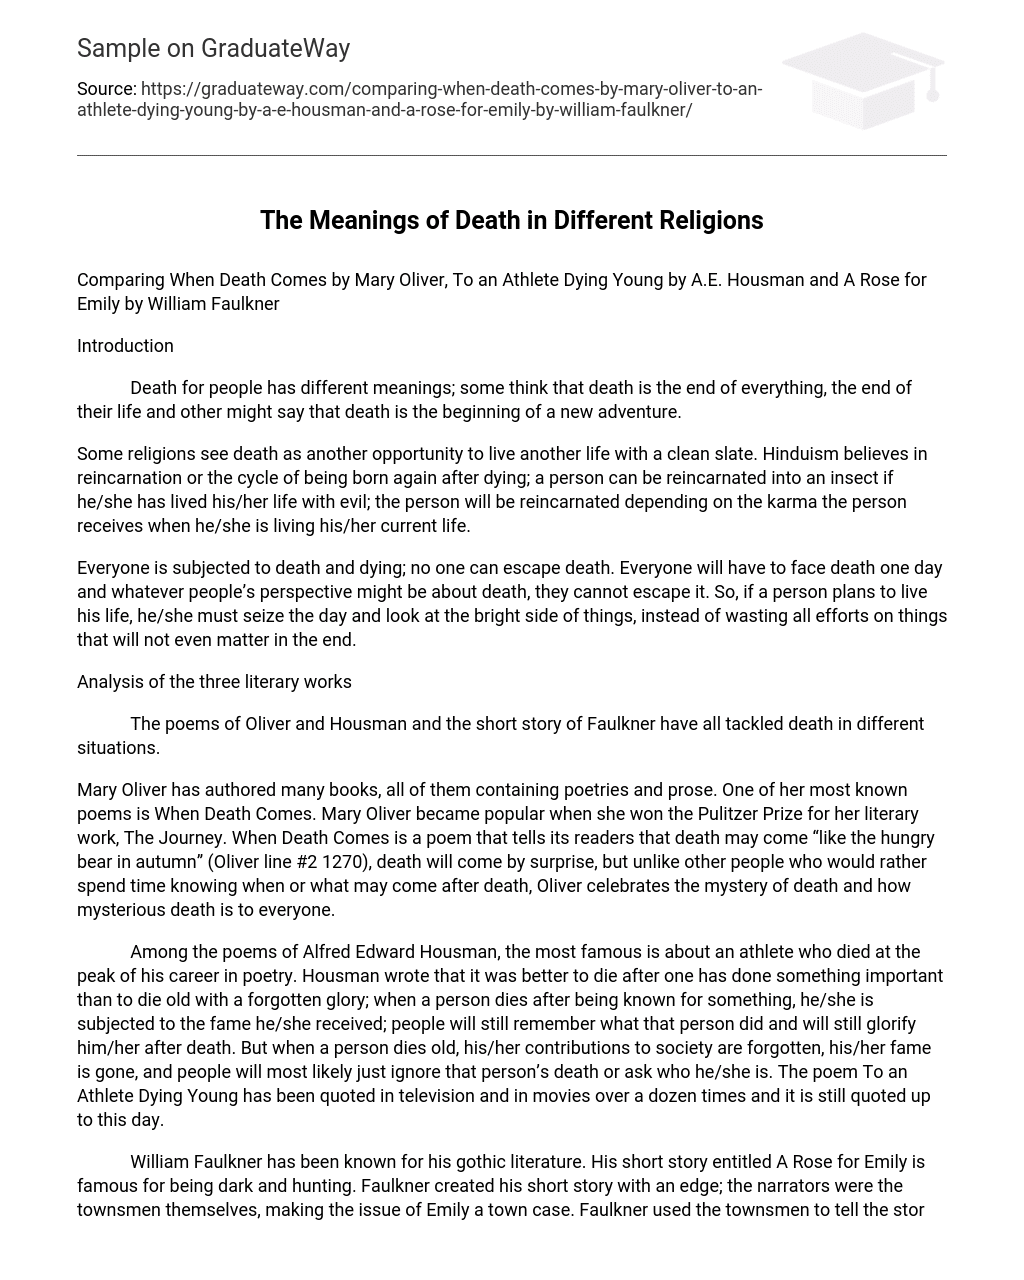 The Meanings of Death in Different Religions Analysis